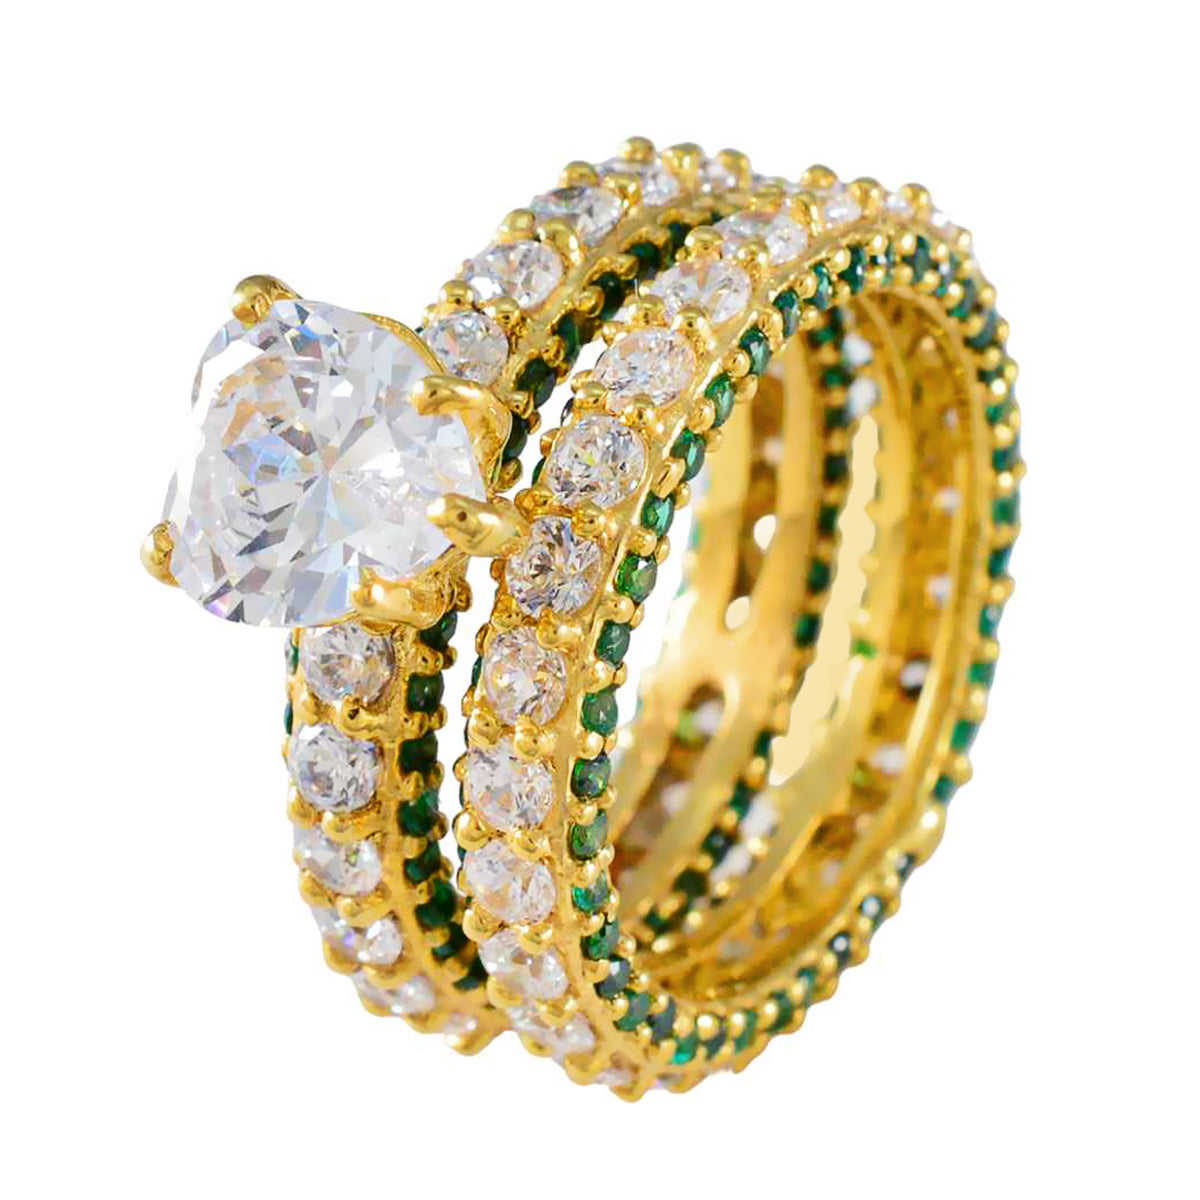 Riyo In Quantity Silver Ring With Yellow Gold Plating Emerald CZ Stone Heart Shape Prong Setting Fashion Jewelry Easter Ring